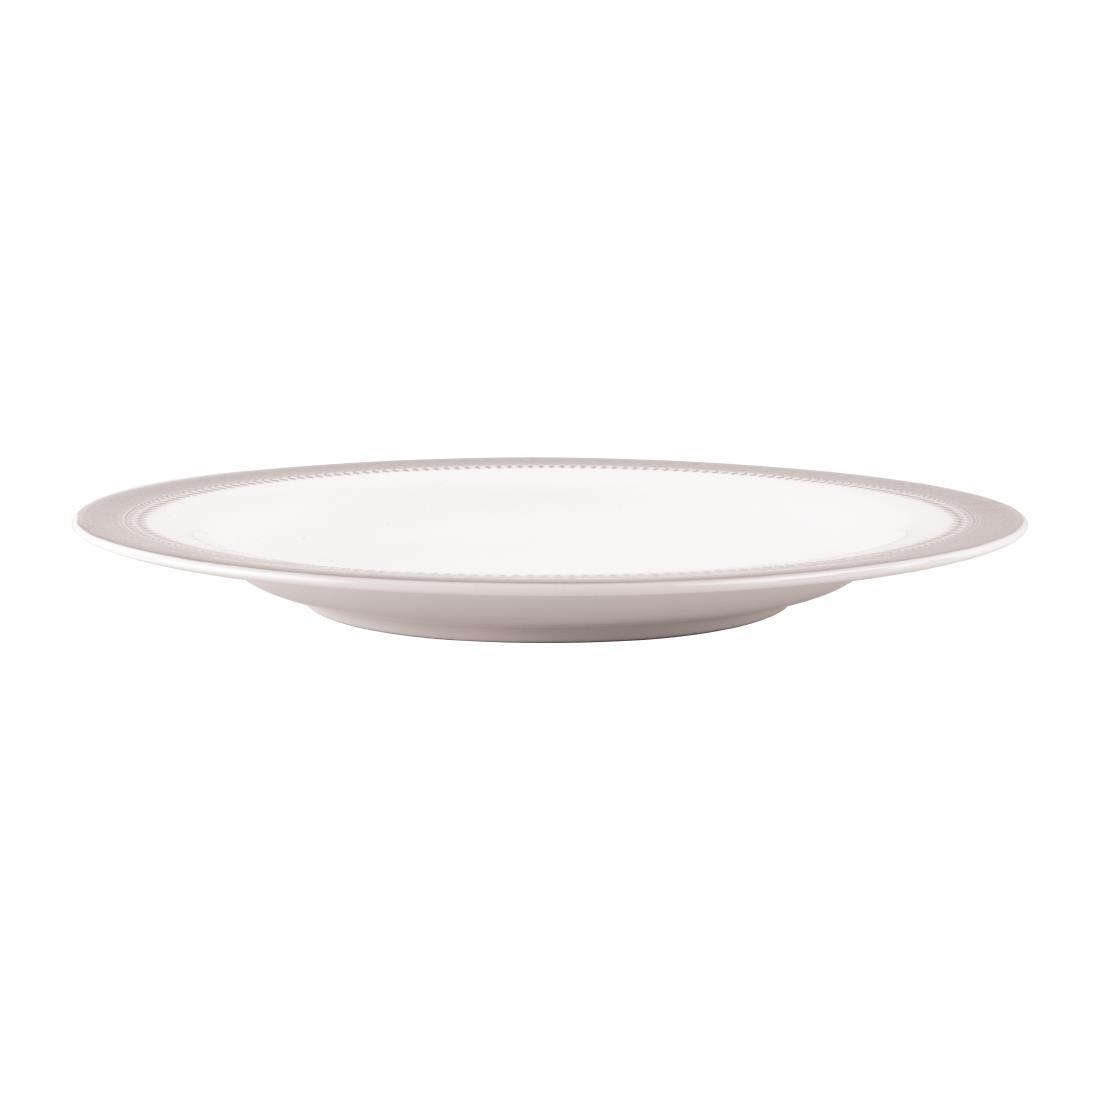 Royal Bone Afternoon Tea Couronne Plate 210mm (Pack of 12) - FB740  - 3